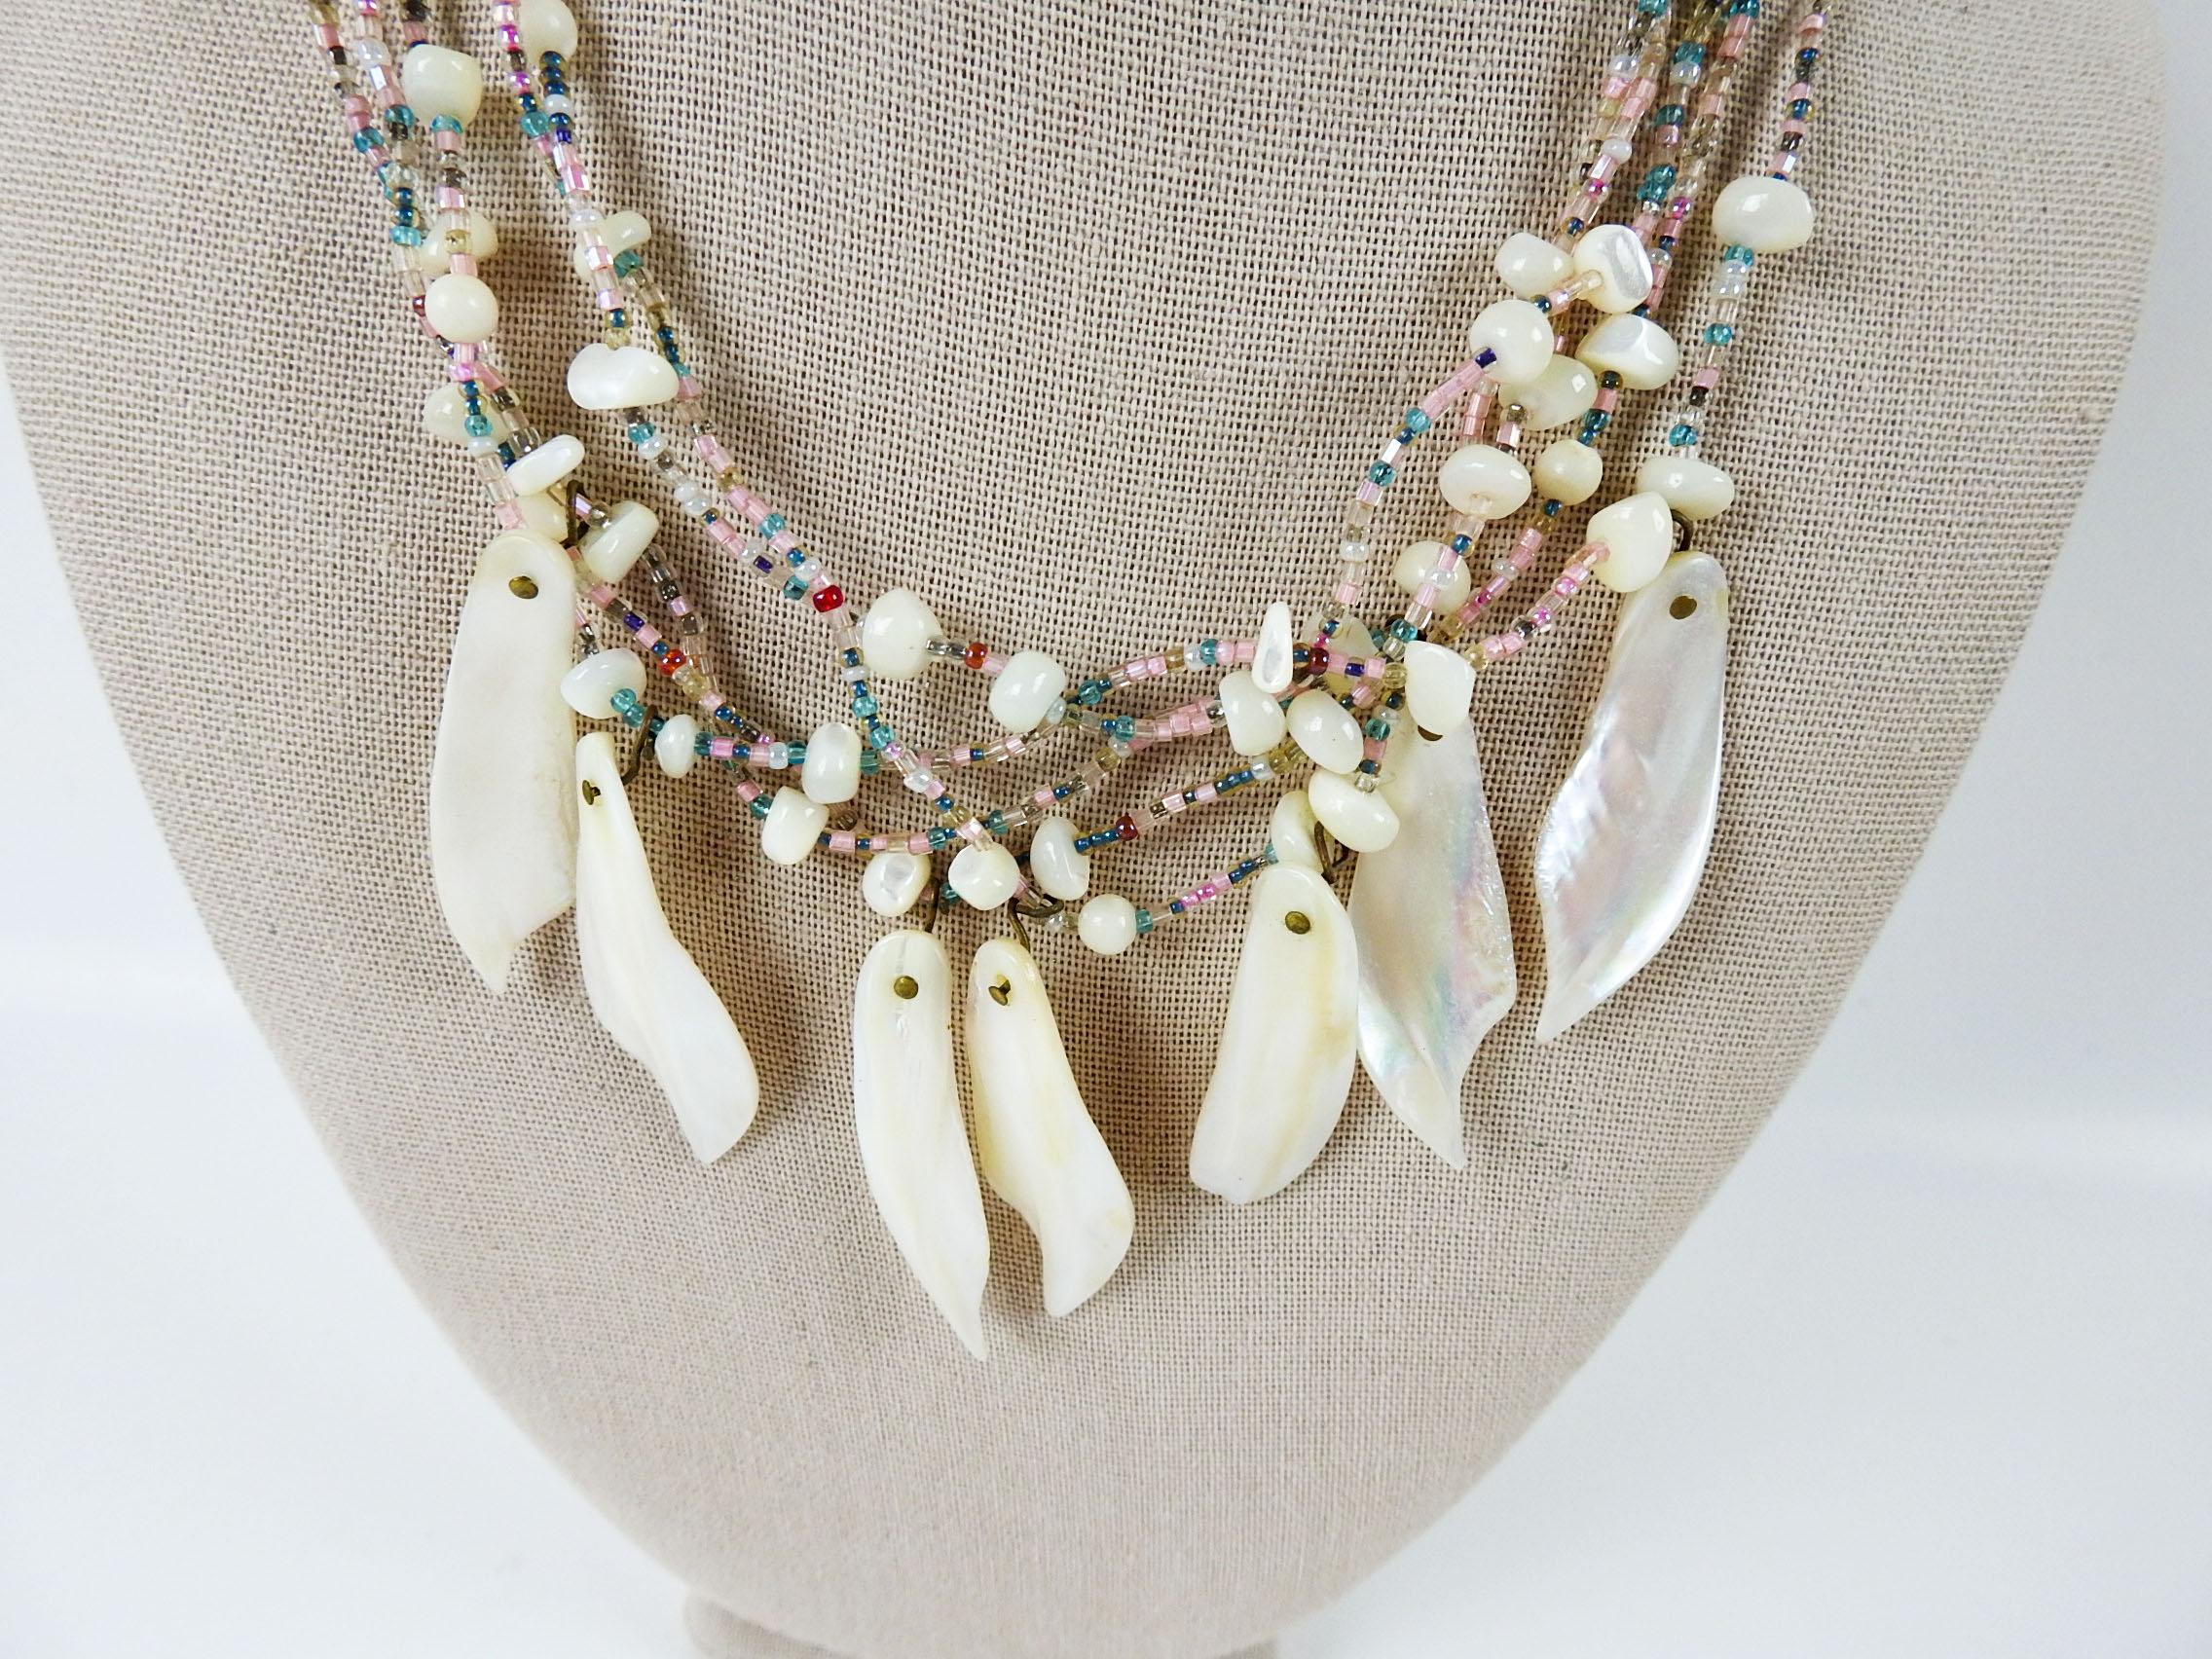 1990's artist studio made beaded necklace using mother of pearl and light blue and pink seed beads. By Linda Thompson (20th/21st century) Texas, 16